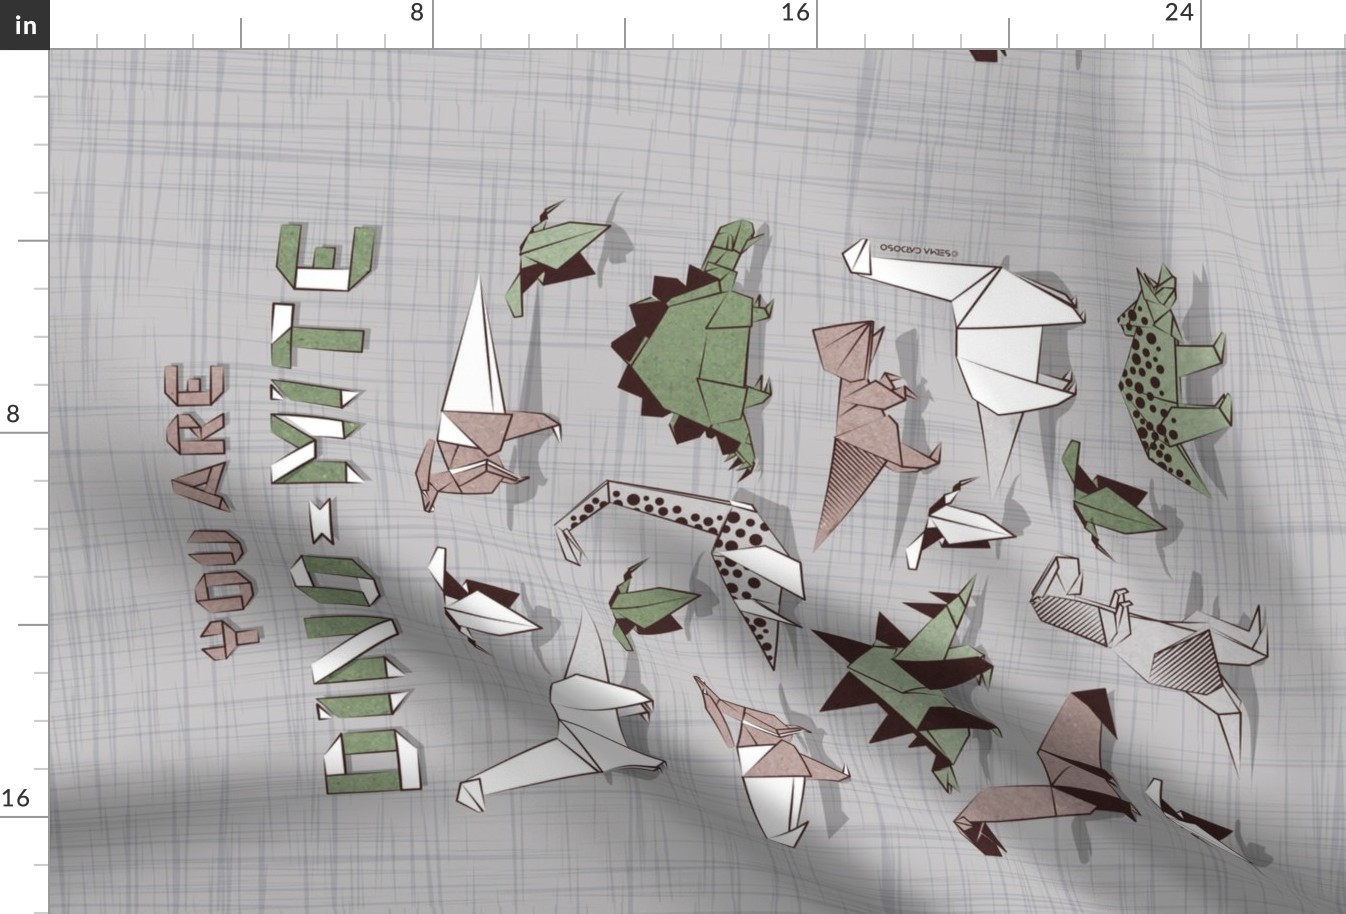 You are dino-mite punderful quote TEA TOWEL // grey linen texture background paper green grey and white origami dinosaurs 